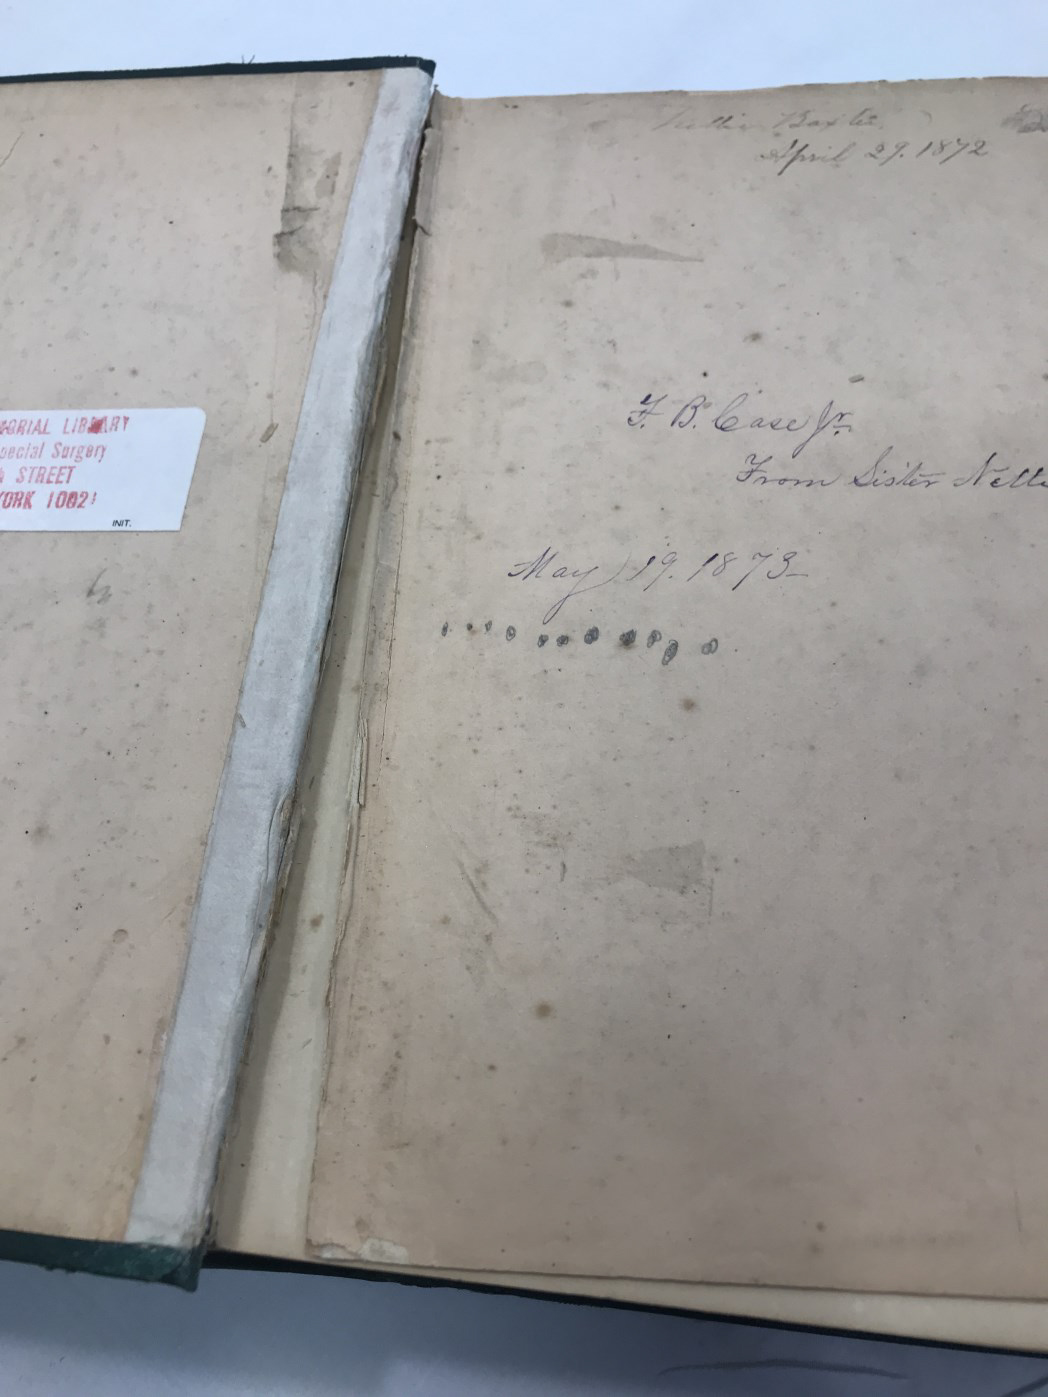 damage to inside cover of Richmond's book